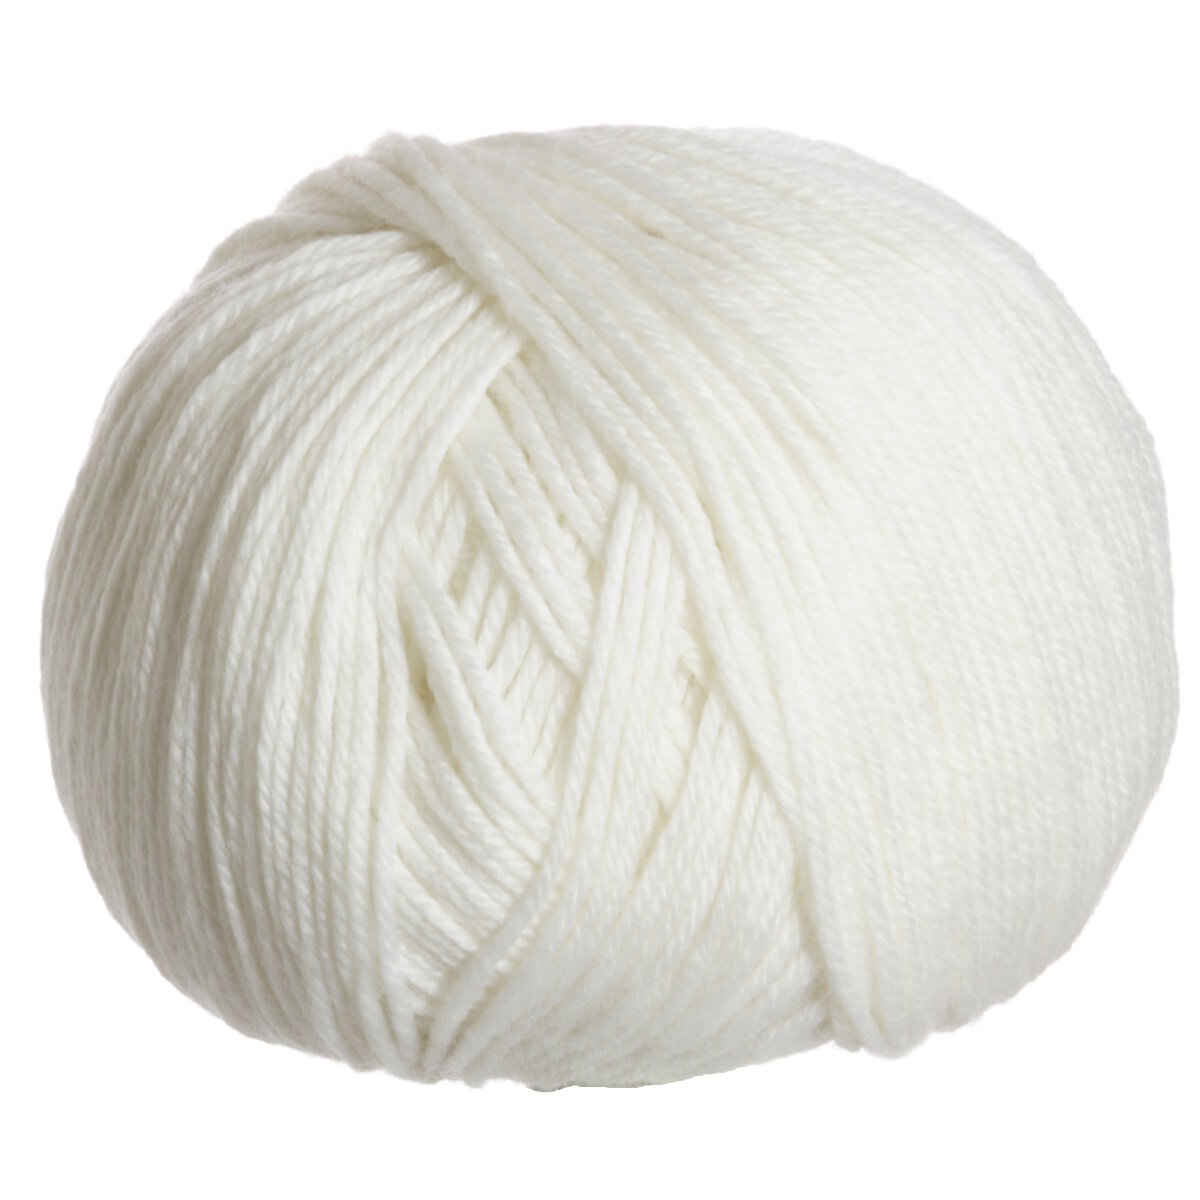 Universal Yarns Deluxe Worsted Superwash Yarn - 728 Pulp at Jimmy Beans ...